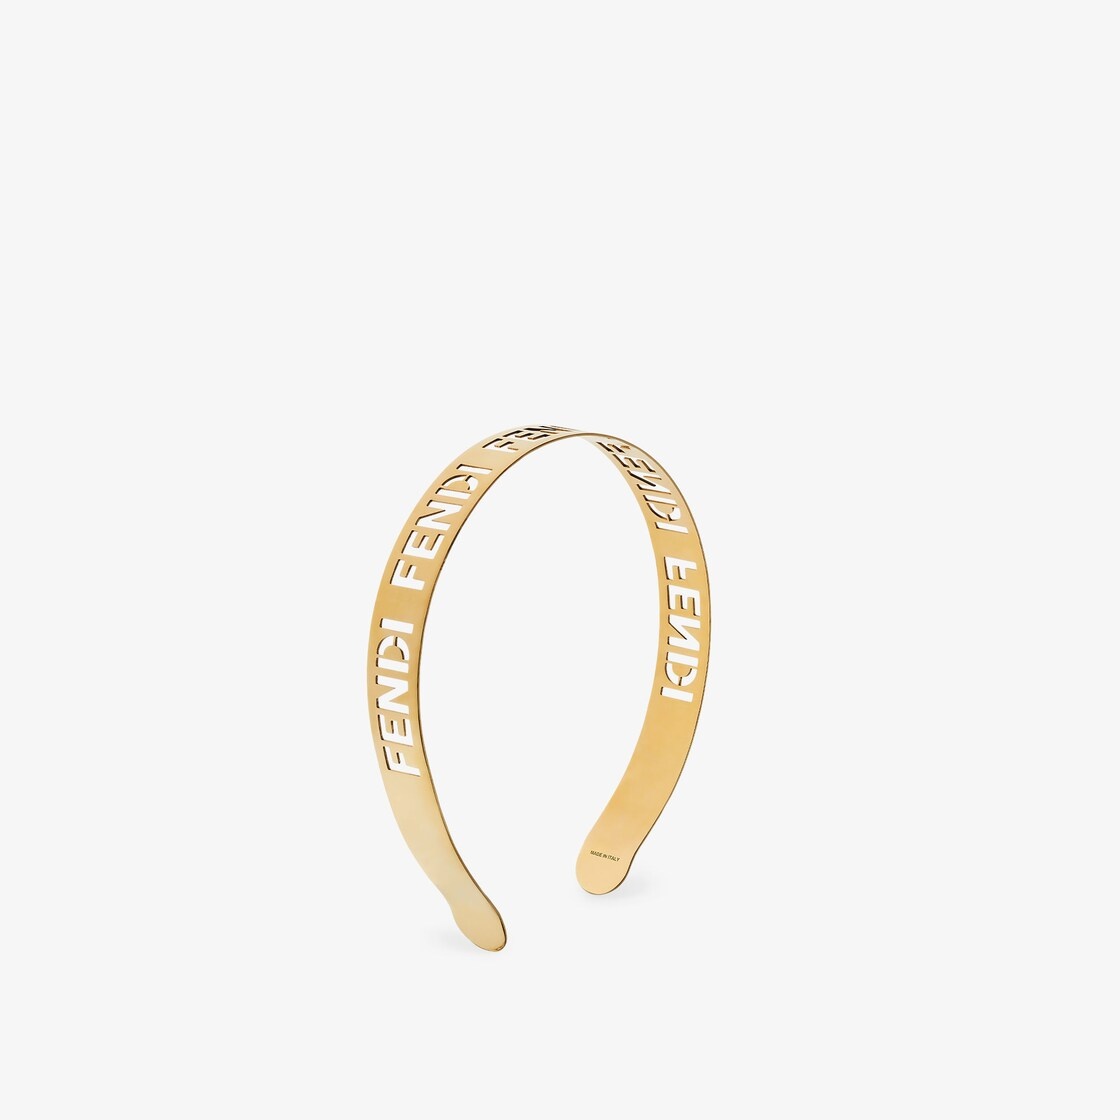 Gold-colored hair band - 1